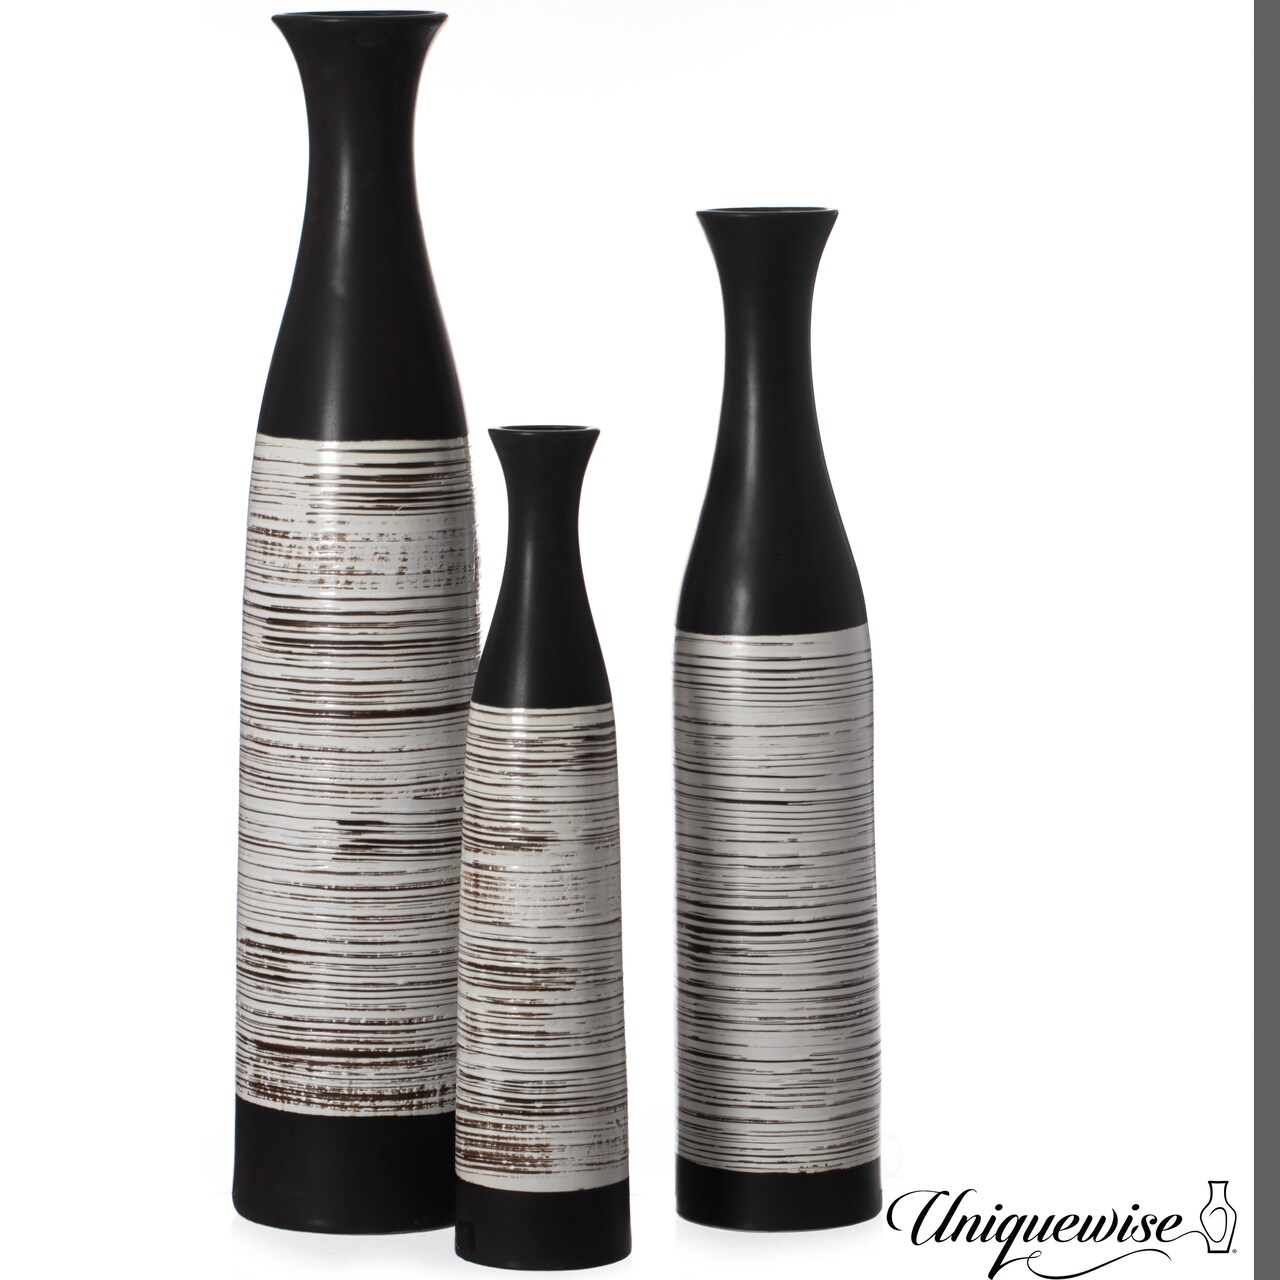 Handcrafted Black and White Waterproof Ceramic Floor Vase - Neat Classic Bottle Shaped Vase, Freestanding Design, Perfect for Tall Floral Arrangements